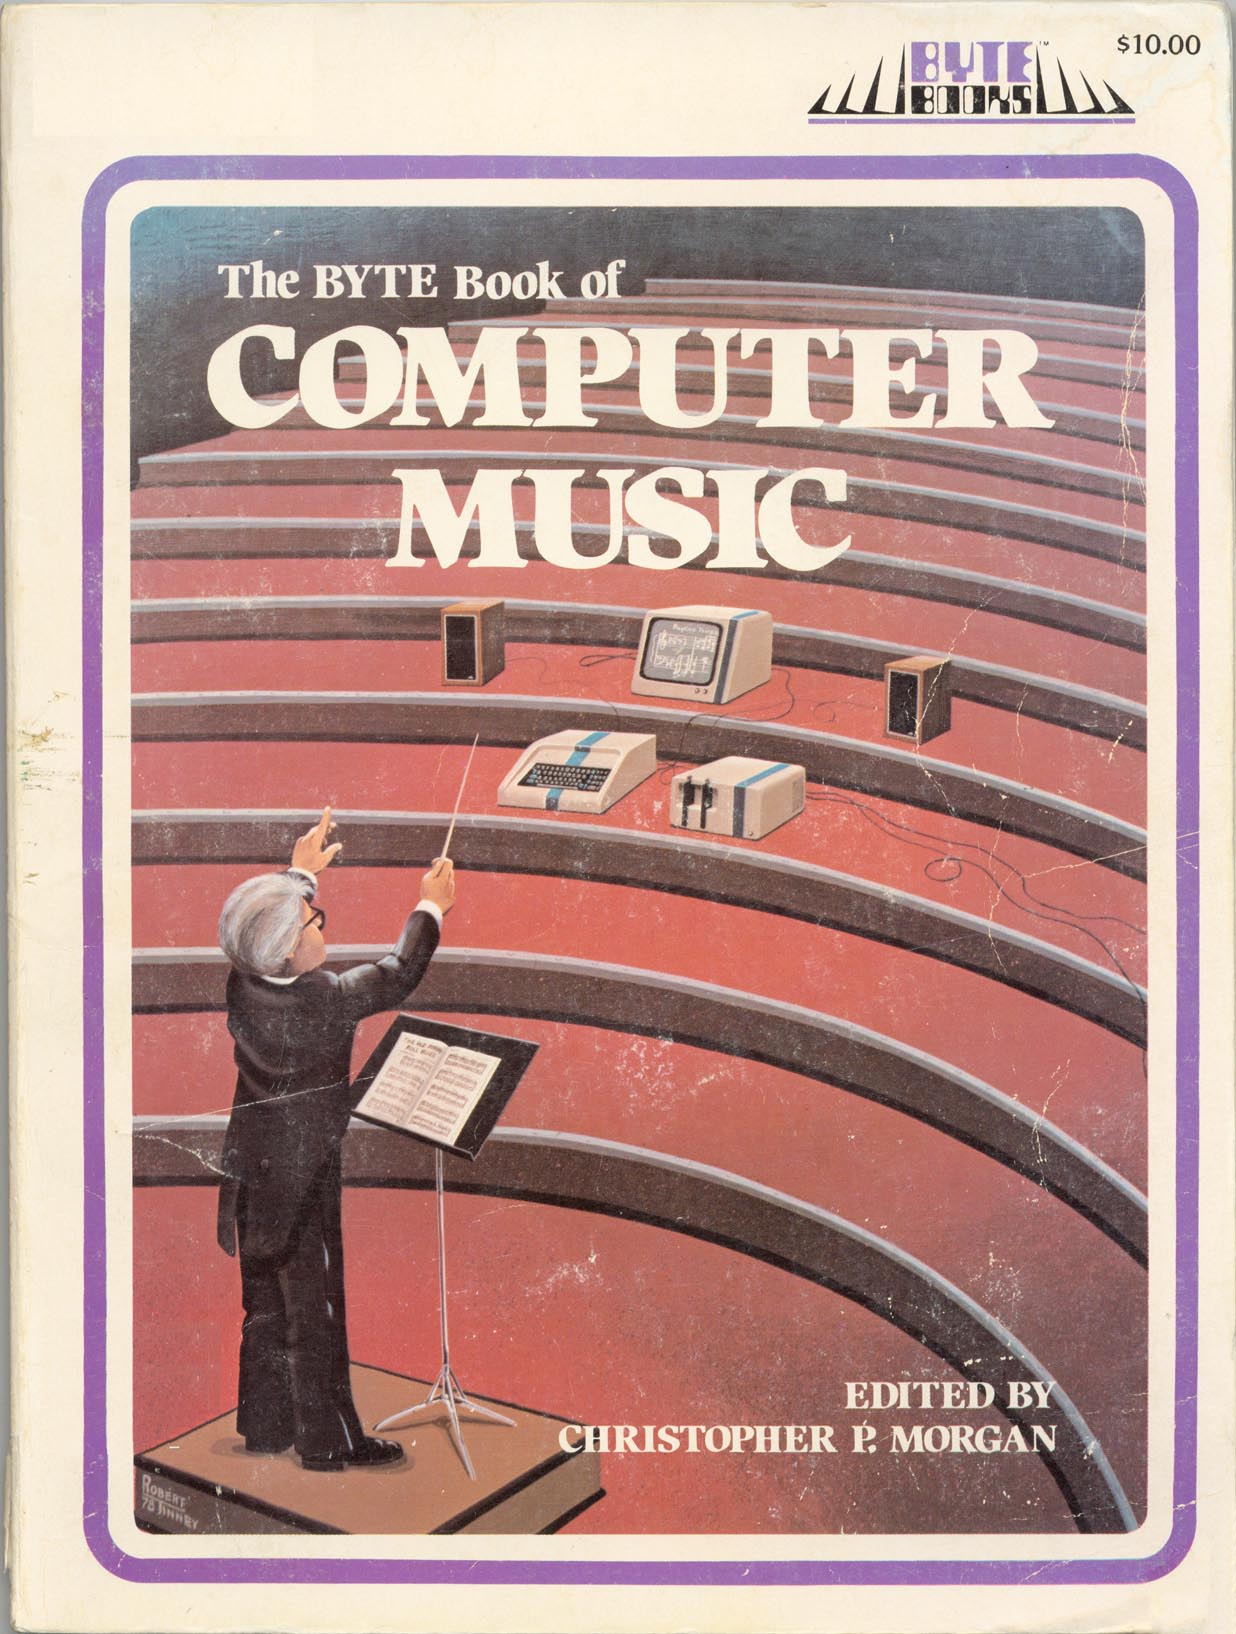 Byte%20Book%20of%20Computer%20Music%20%28Edited%20by%20Christopher%20P%20Morgan%29%281979%29.jpg